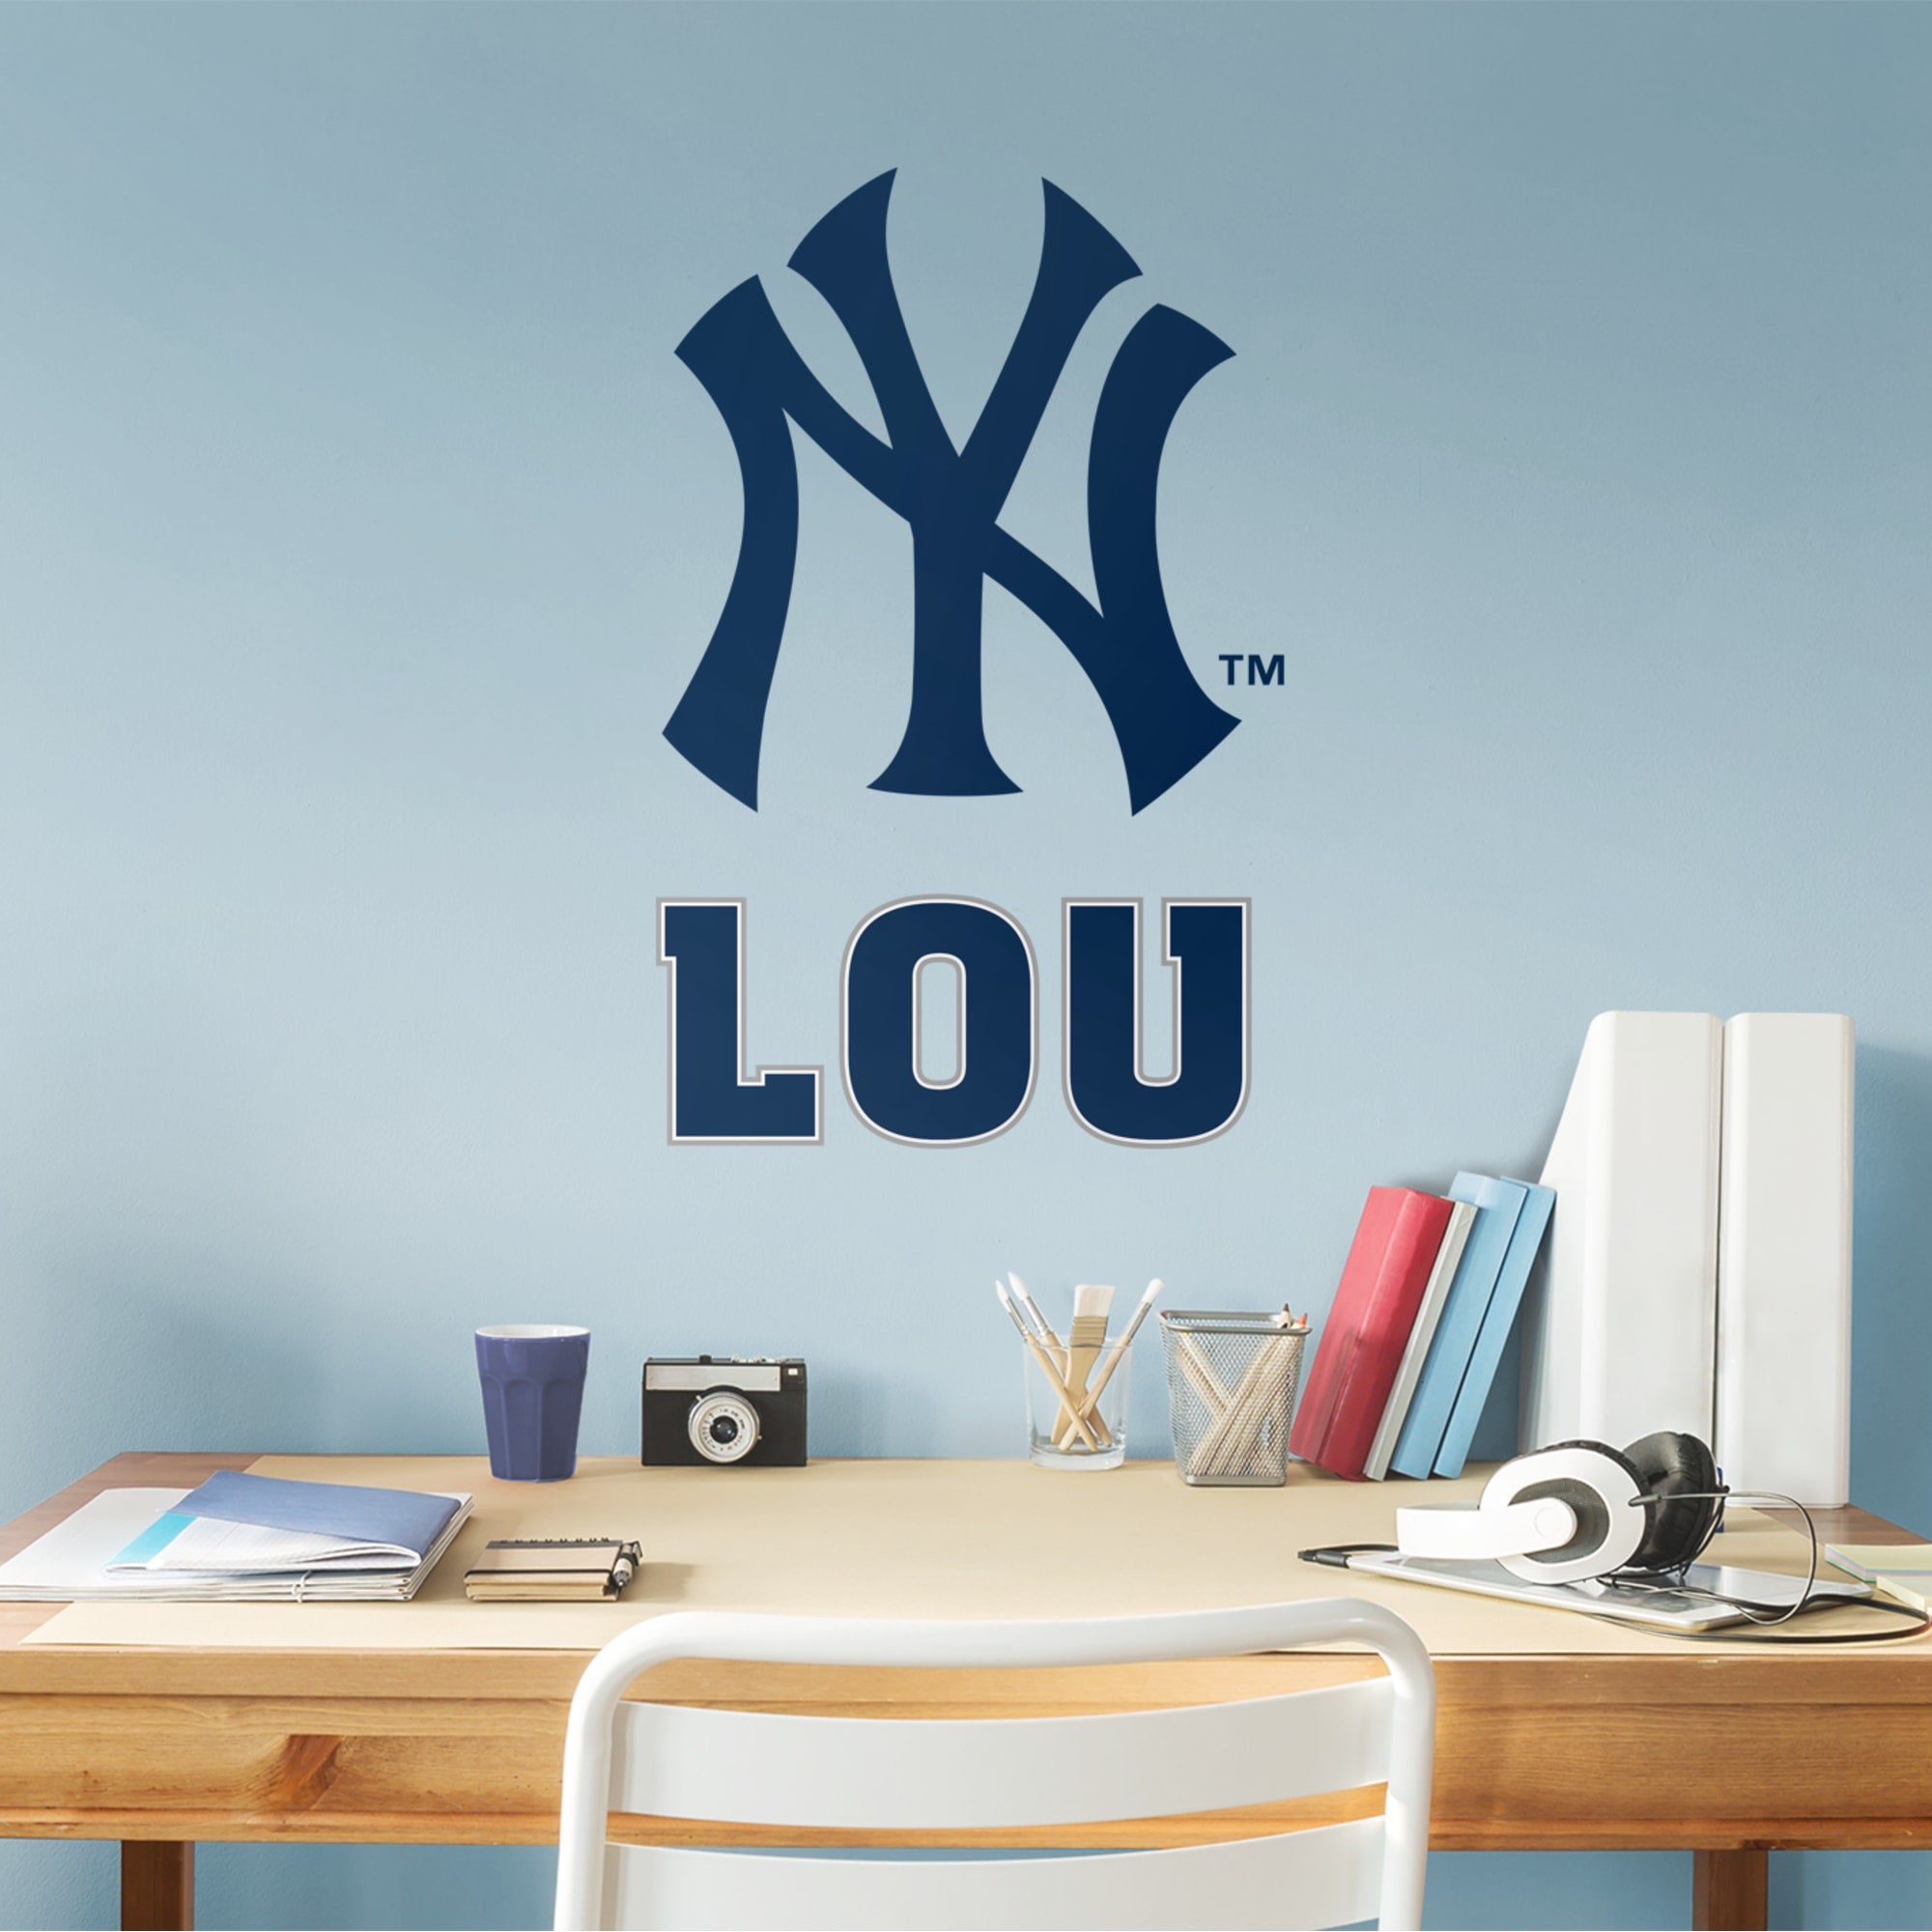 New York Yankees: Stacked "NY" Personalized Name - Officially Licensed MLB Transfer Decal in Navy (52"W x 39.5"H) by Fathead | V